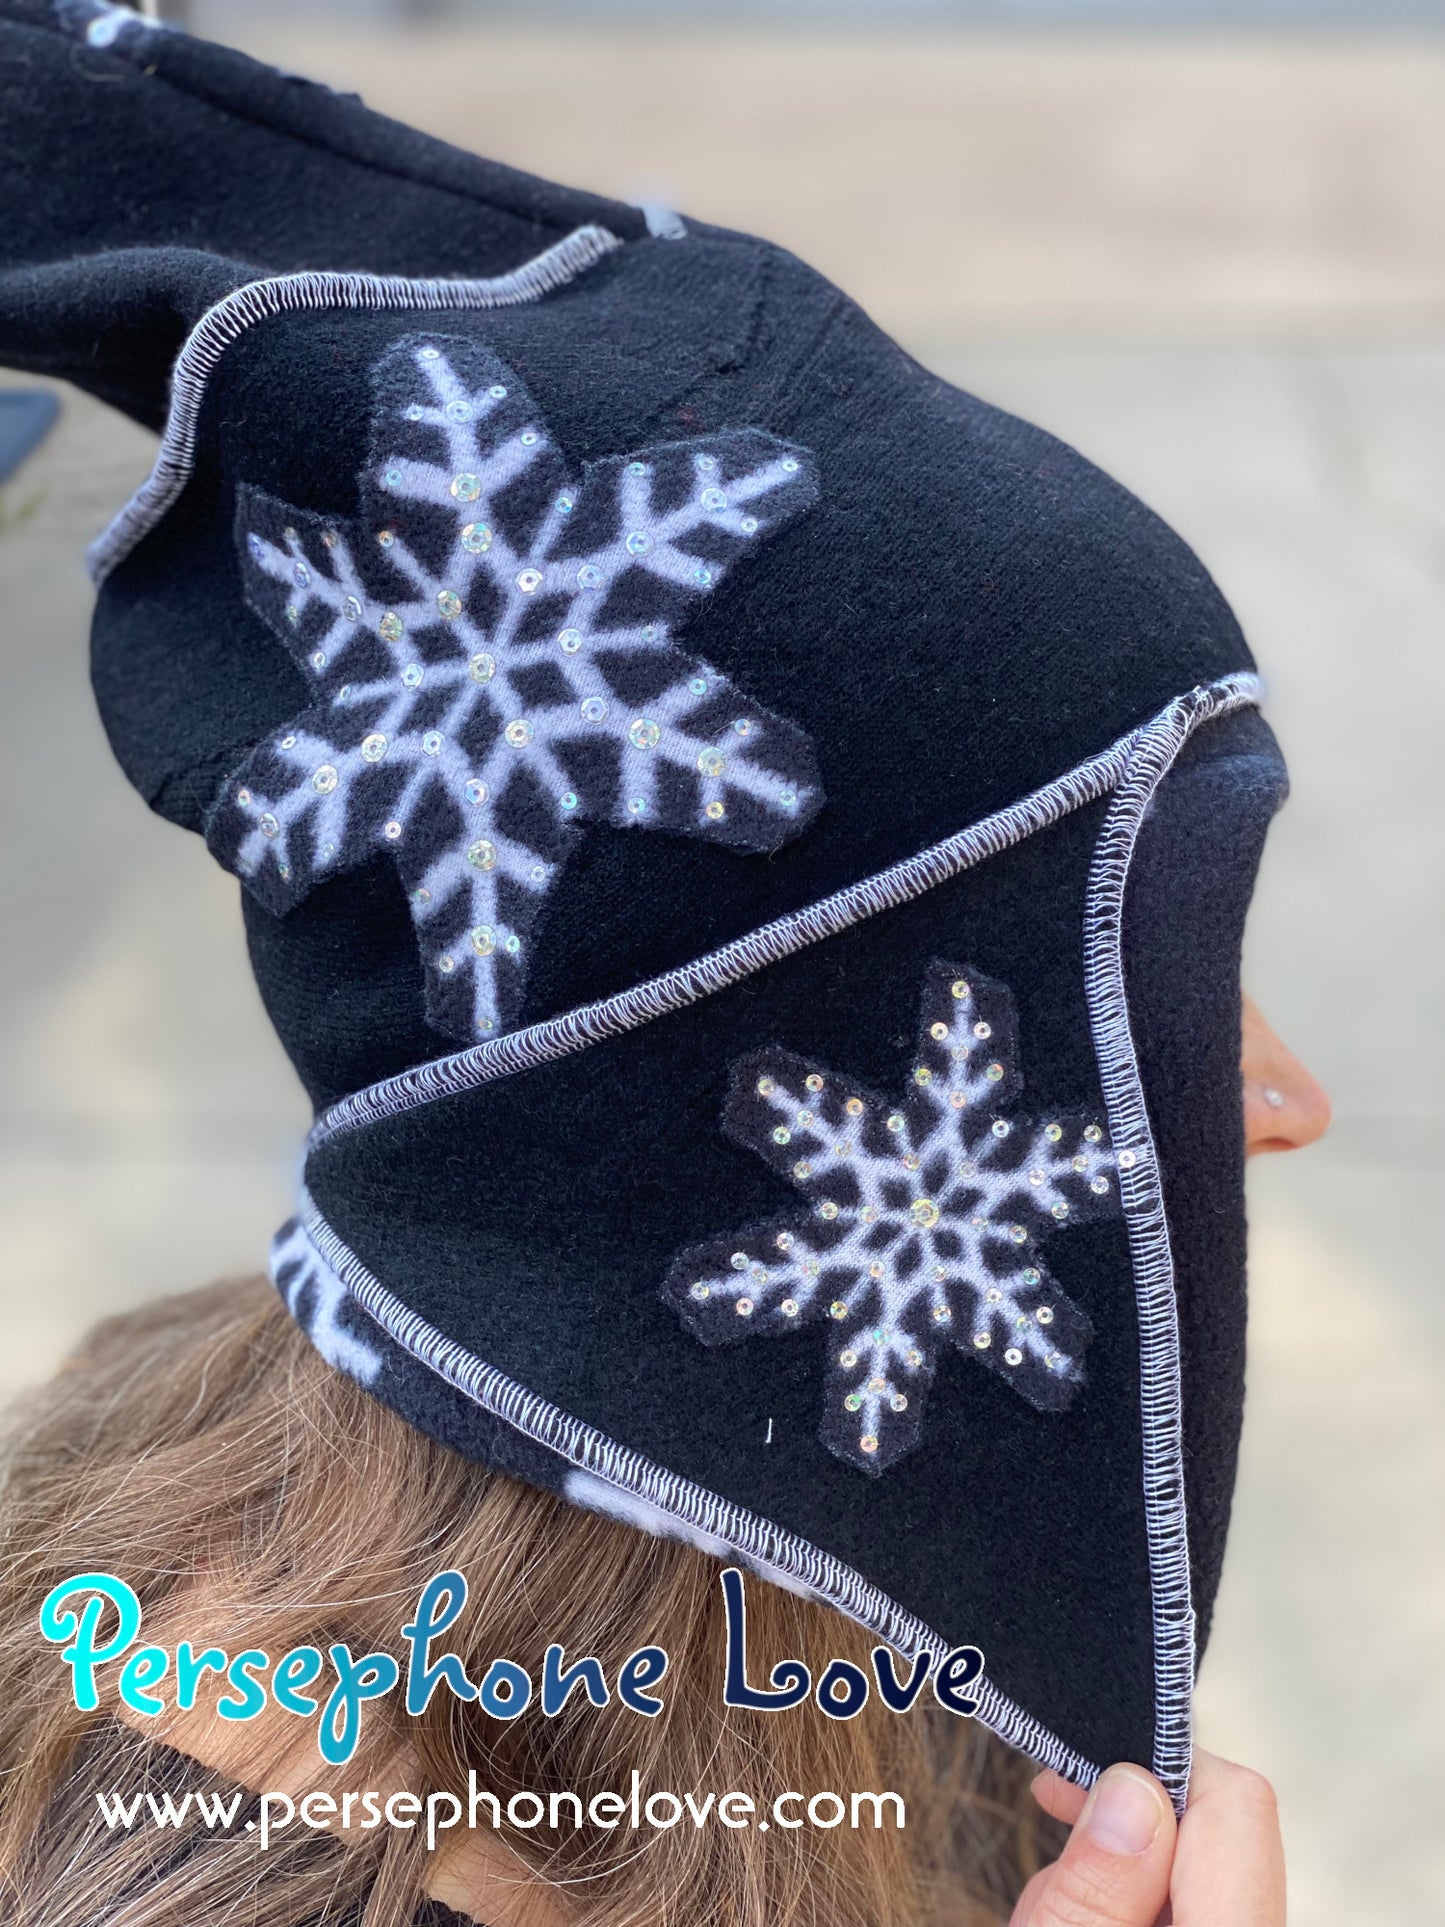 Katwise inspired black white snowflake felted 100% cashmere/fleece sequin pixie elf hat-1437